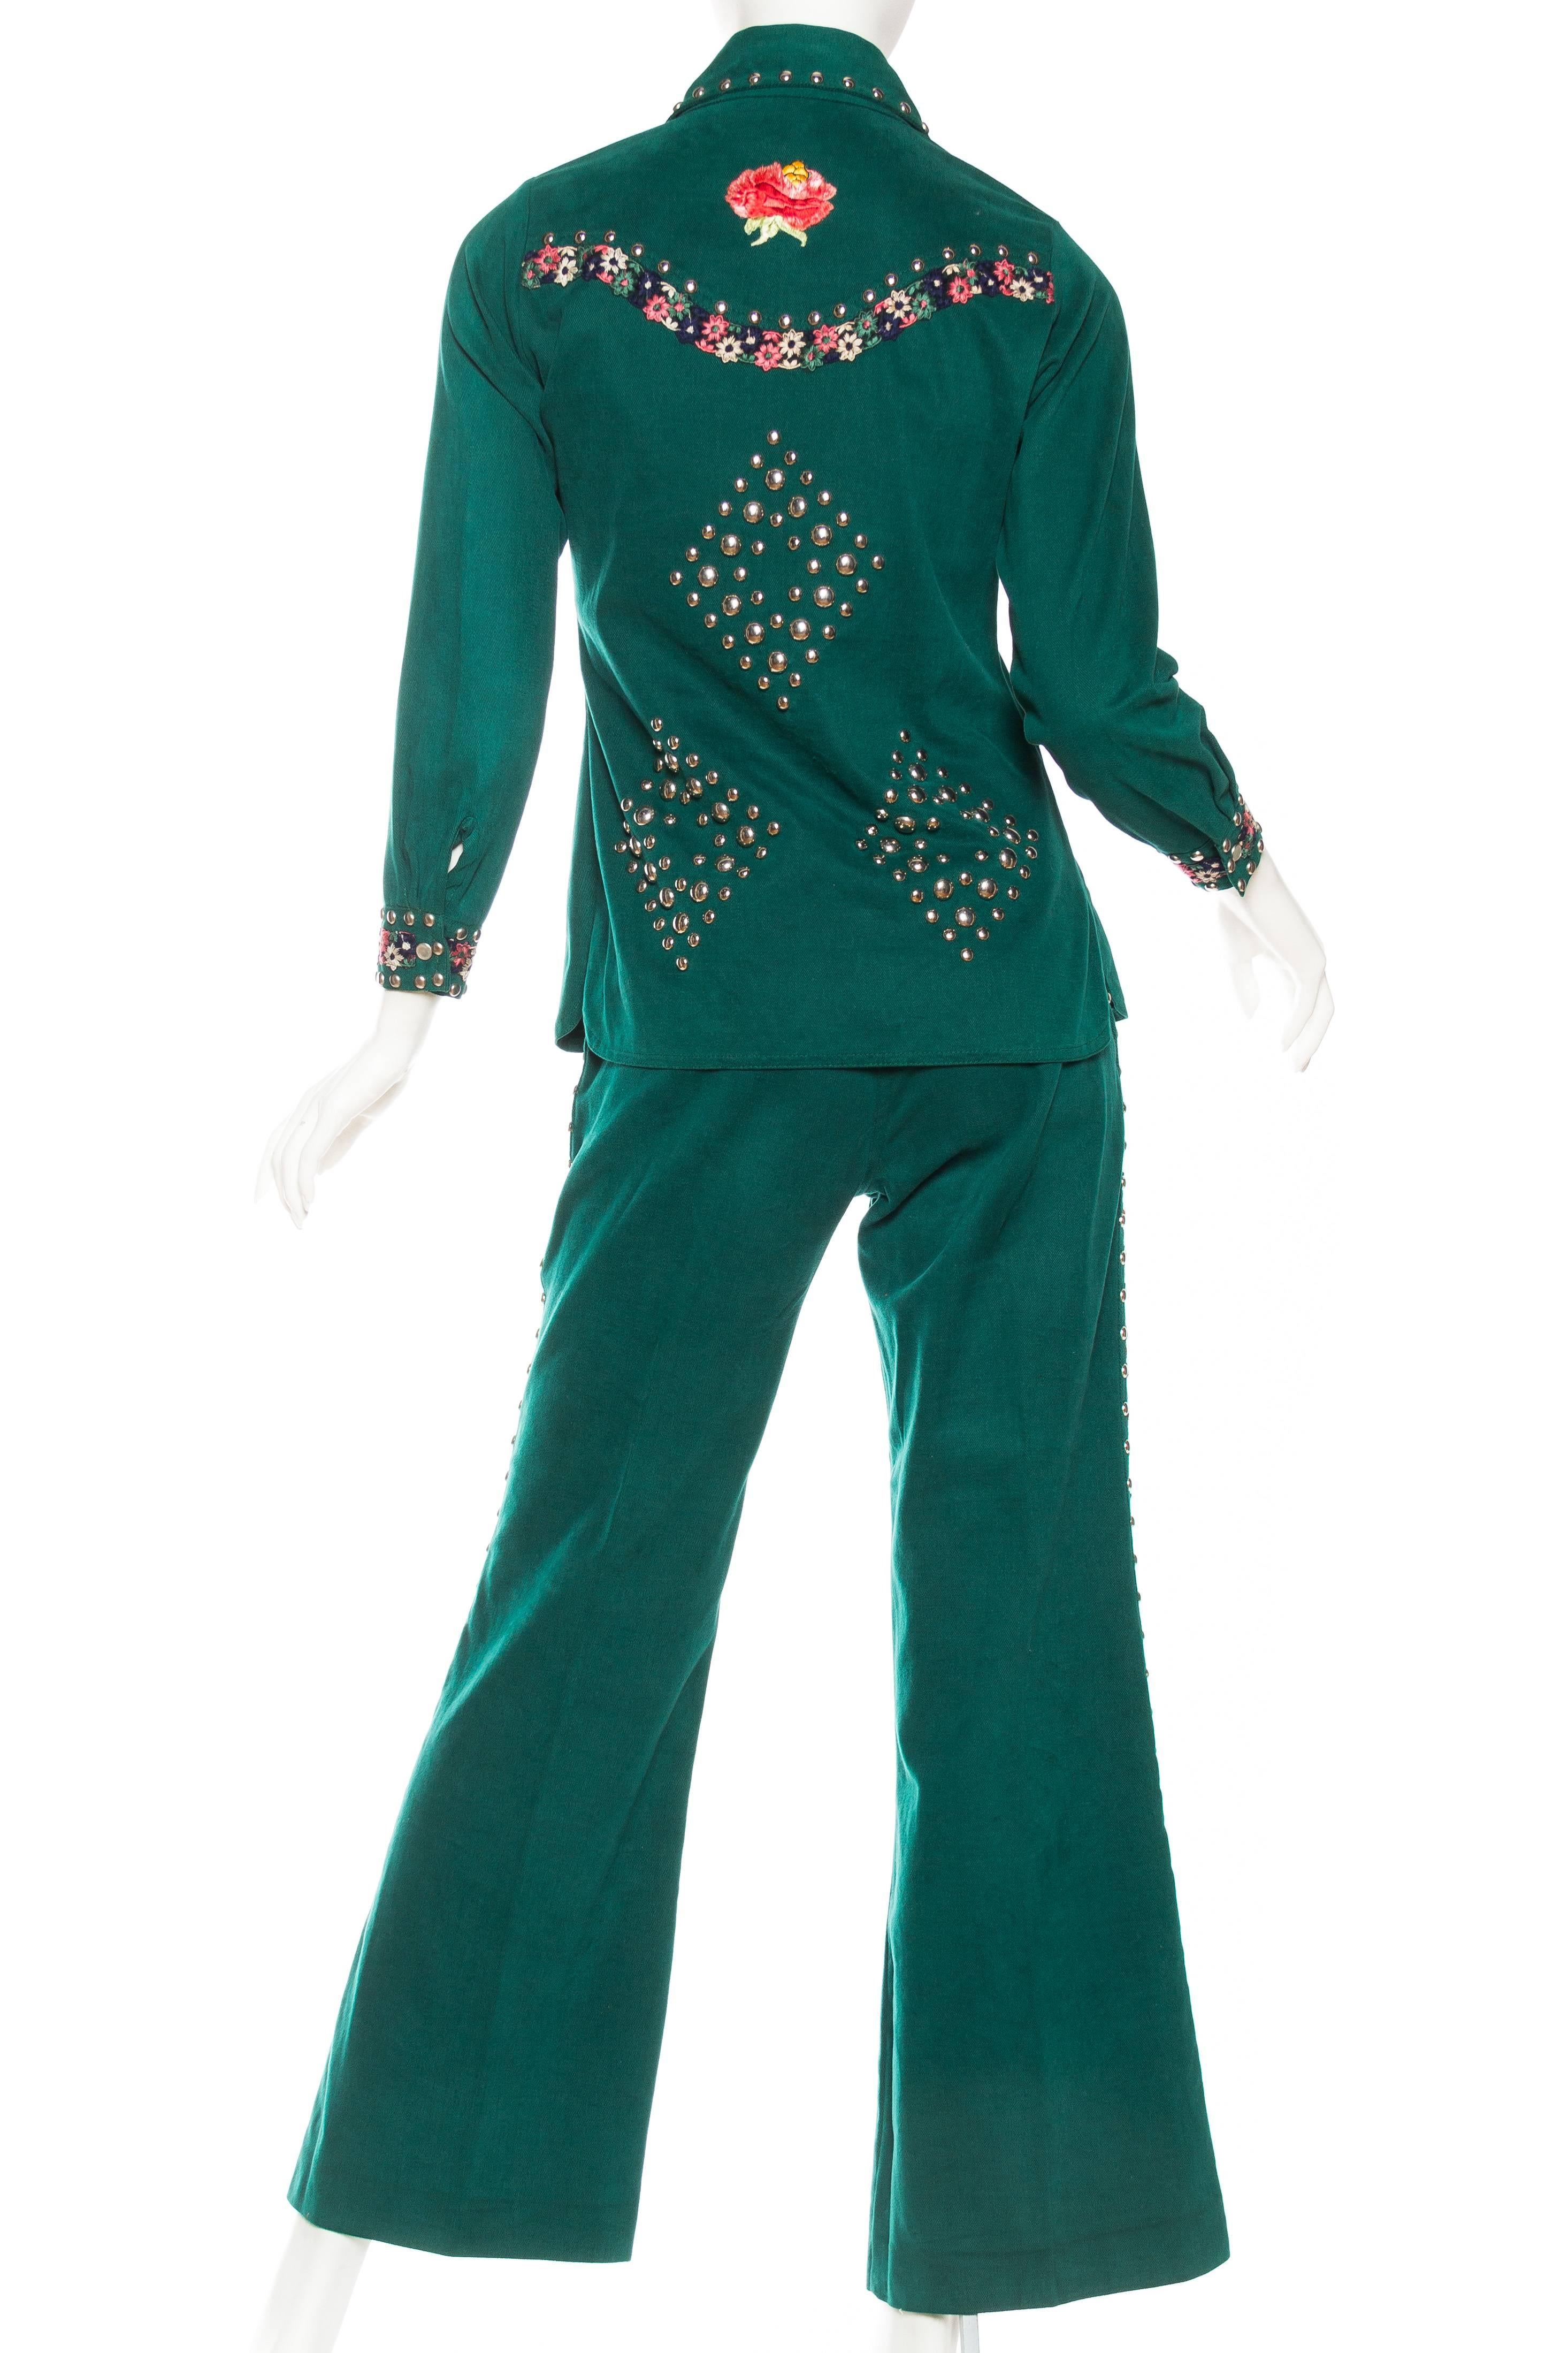 Gucci Style 1970s Studded Denim Suit with Floral Embroidery 1